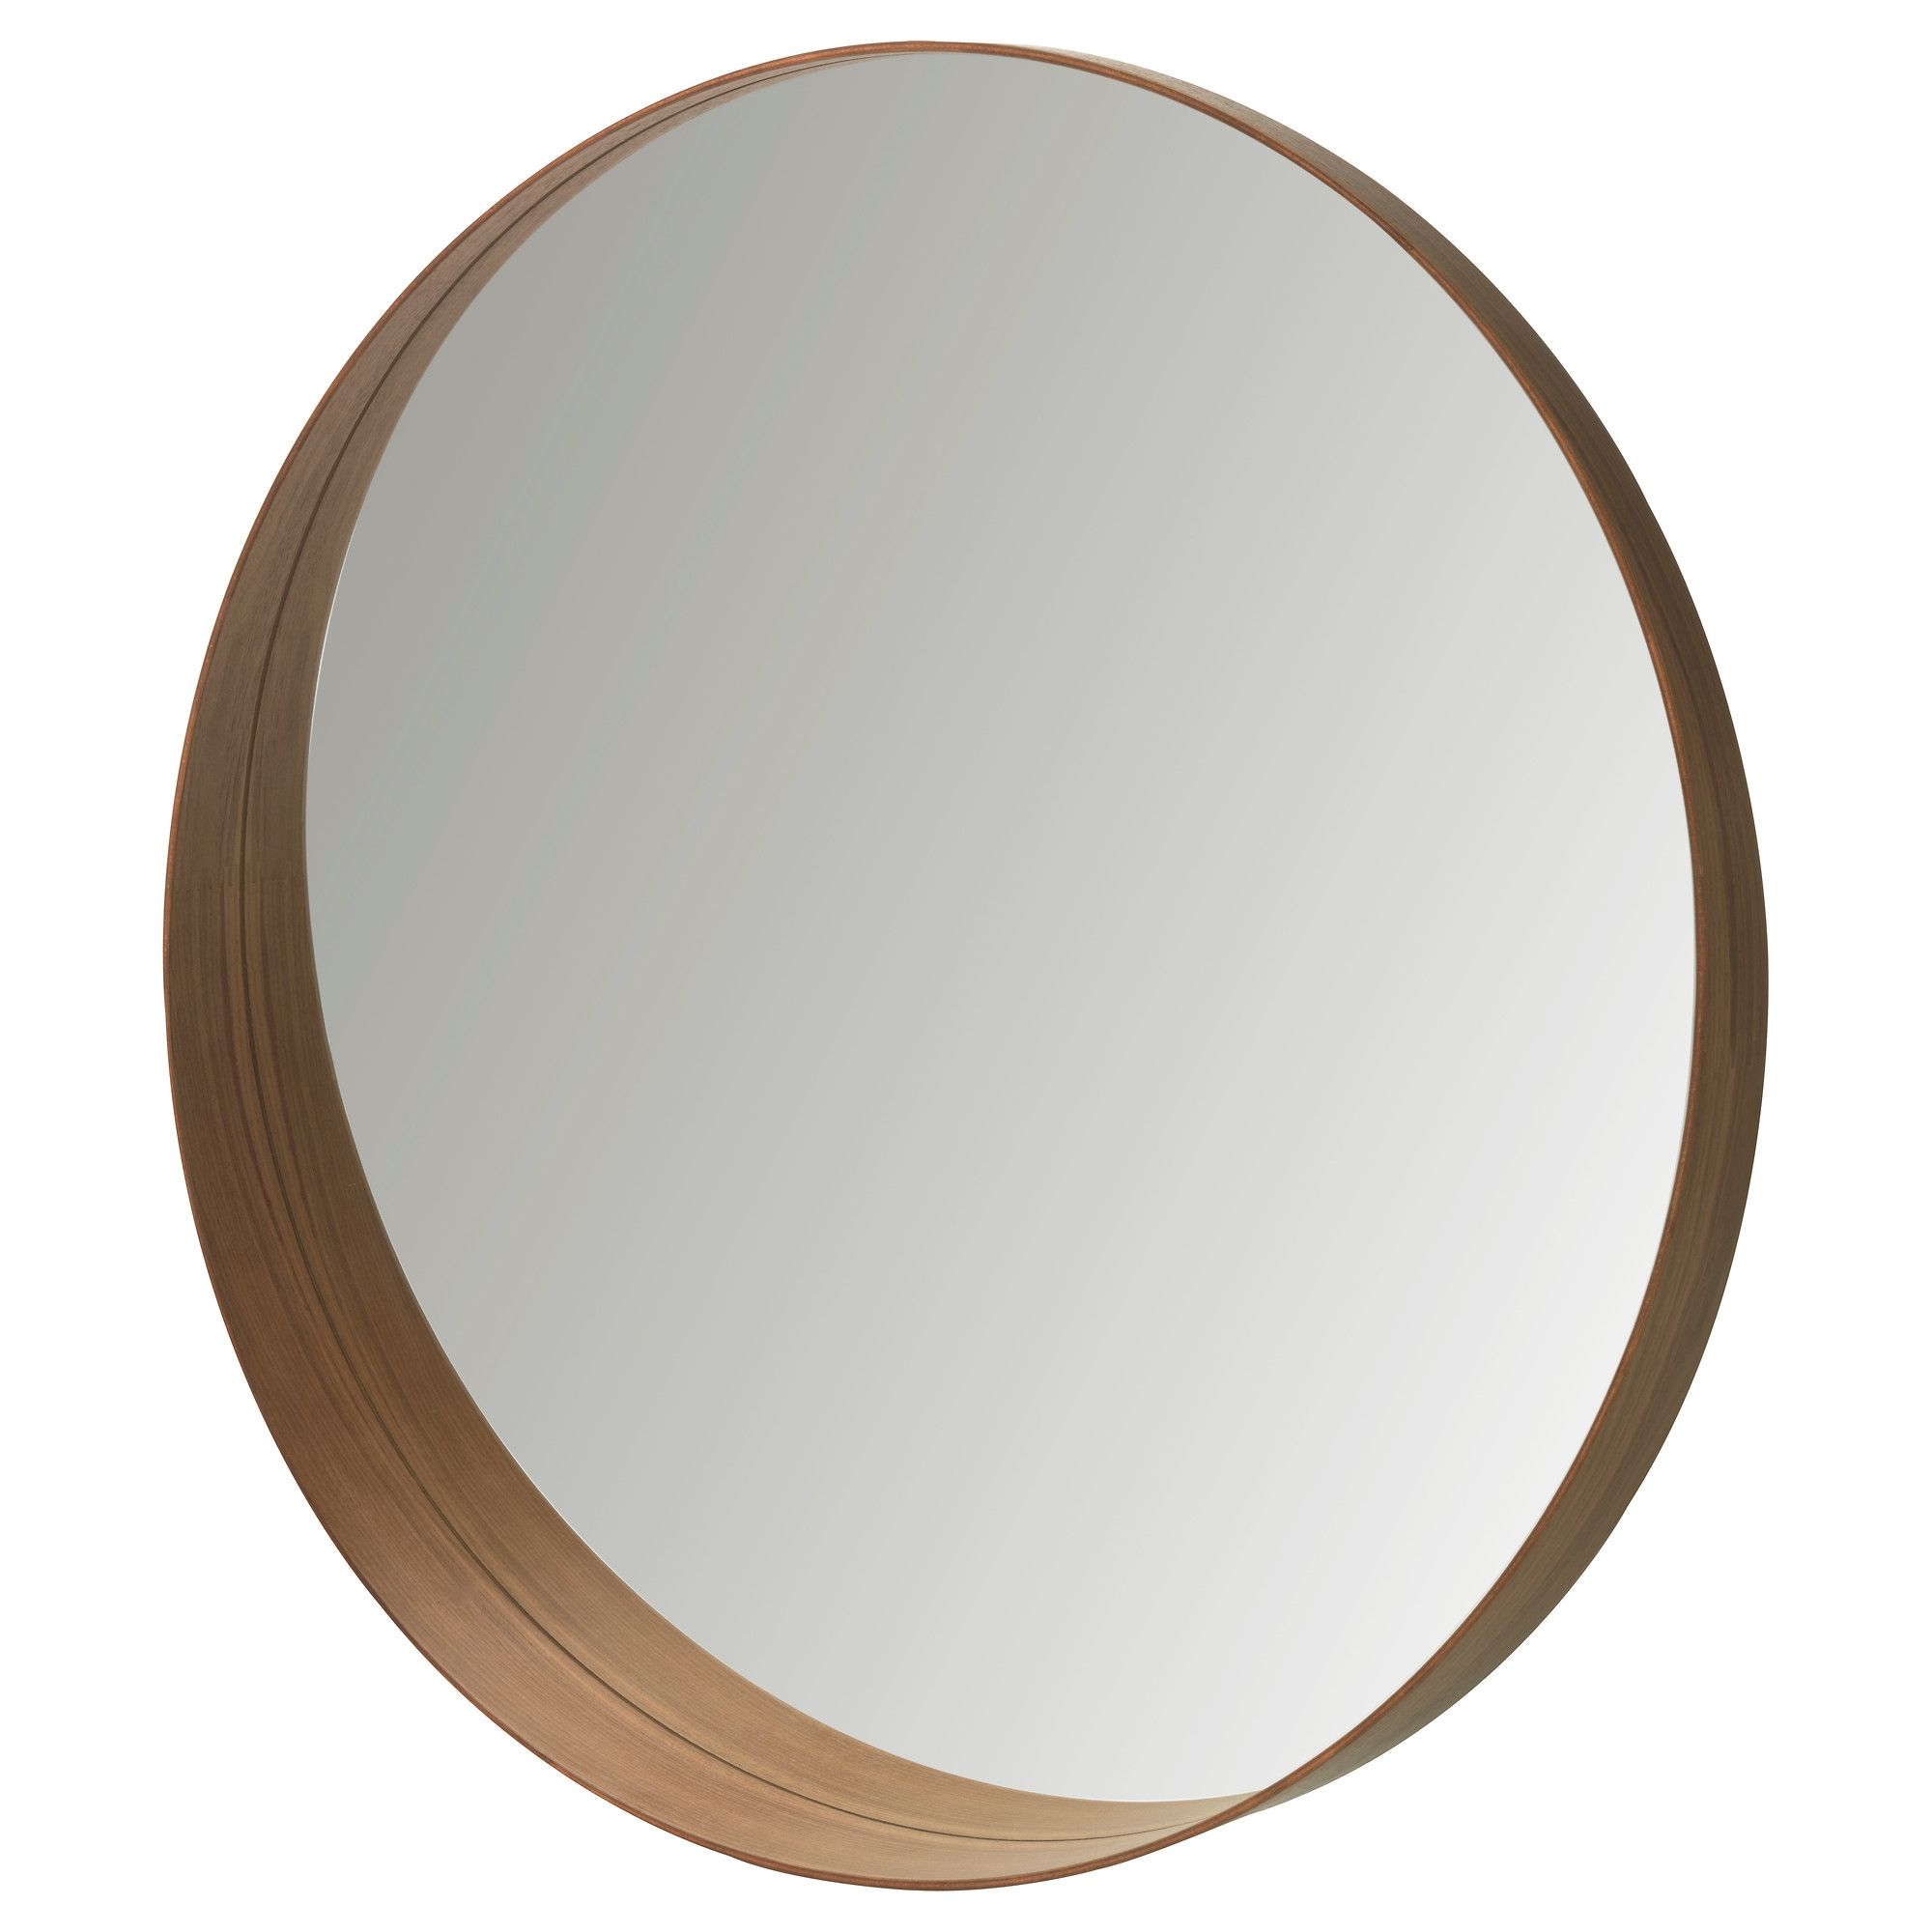 Mirrors Floor Table Wall Mirrors Ikea With Large Round Mirrors For Sale (View 12 of 15)